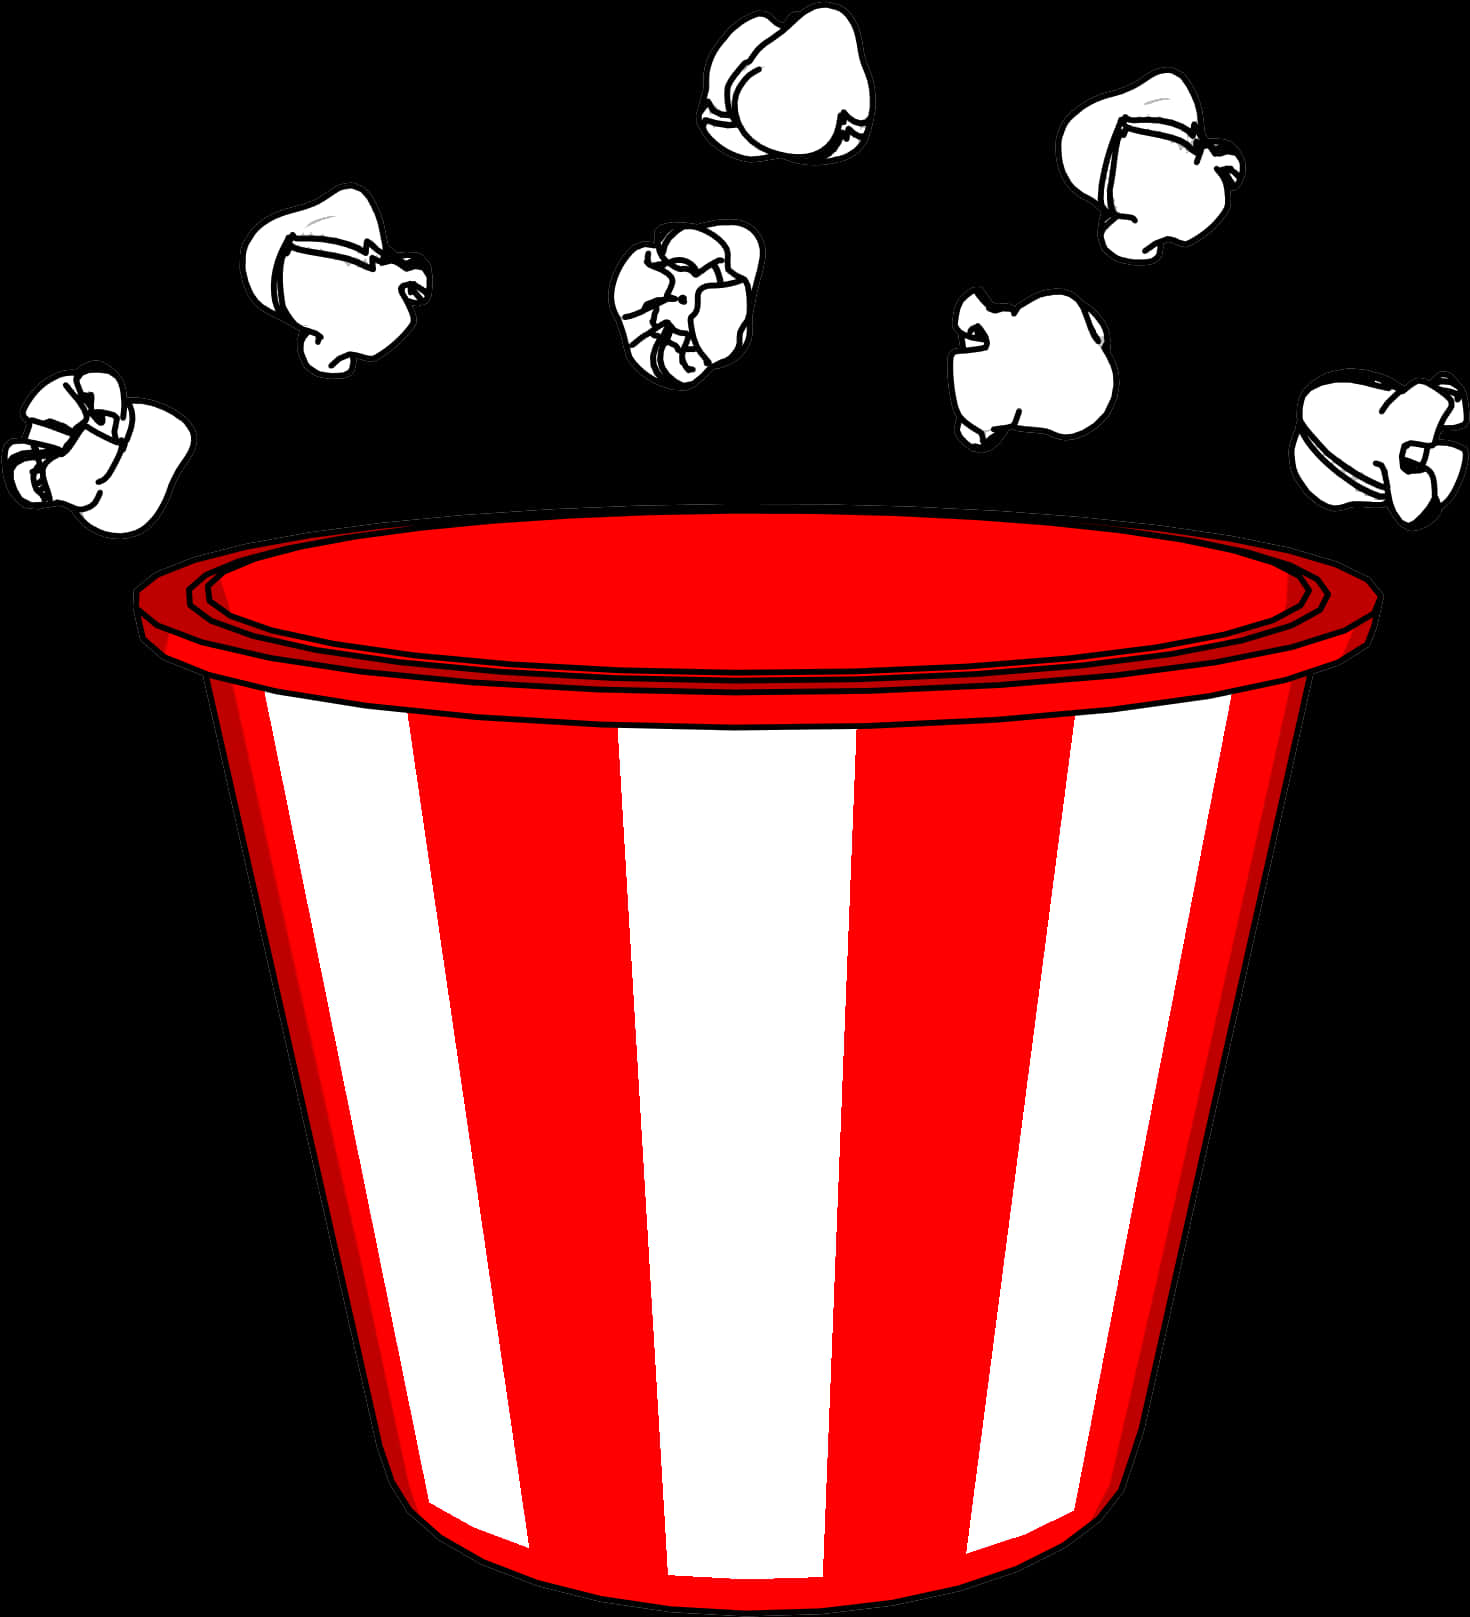 Red Striped Popcorn Bucket Clipart PNG